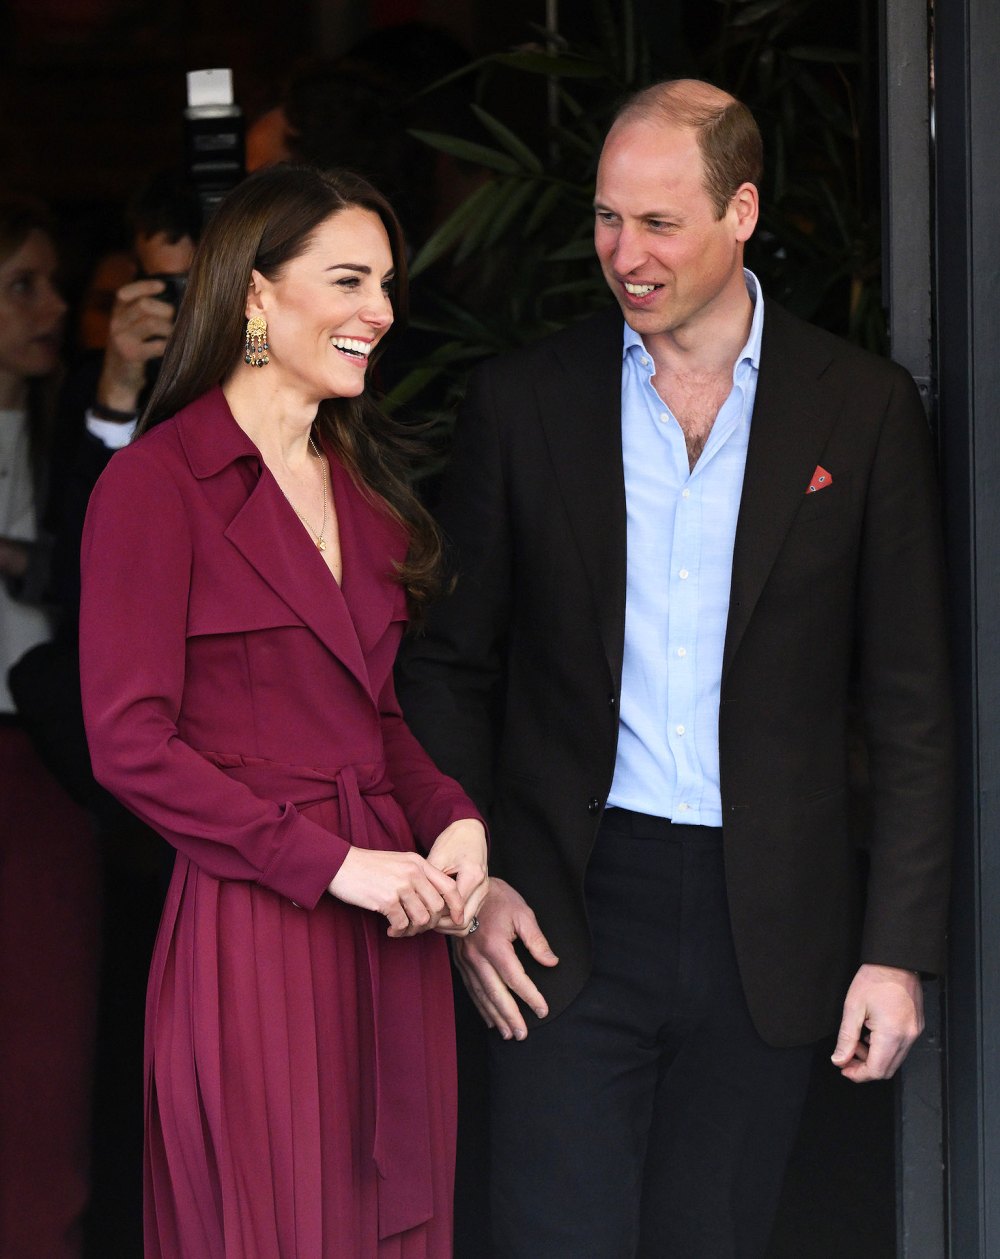 How Prince William Has Been a Constant Source of Strength for Kate Middleton Amid Cancer Battle